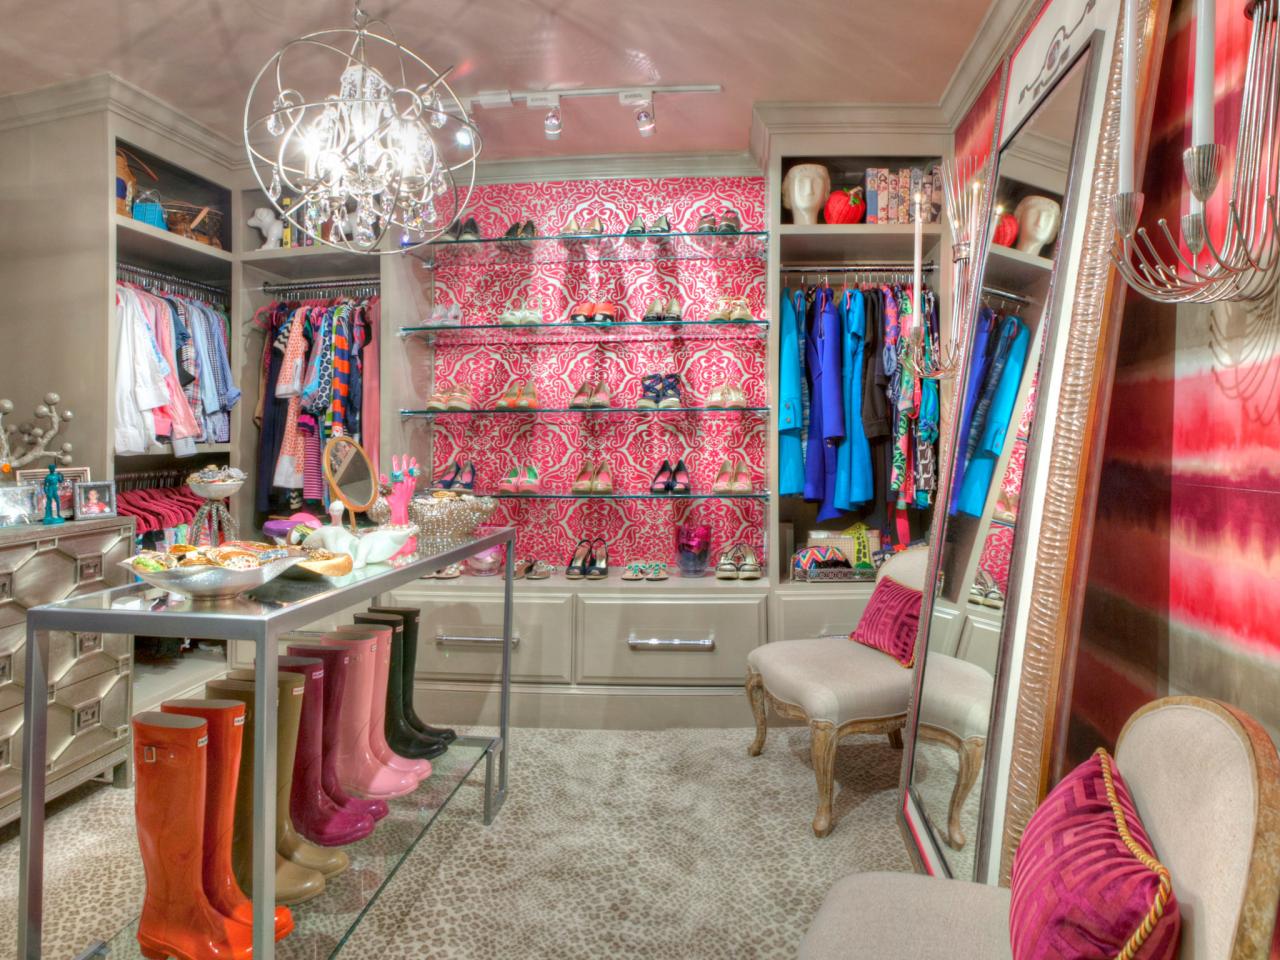 25 Contemporary Walk-in Closets Every Woman Dreams to Own